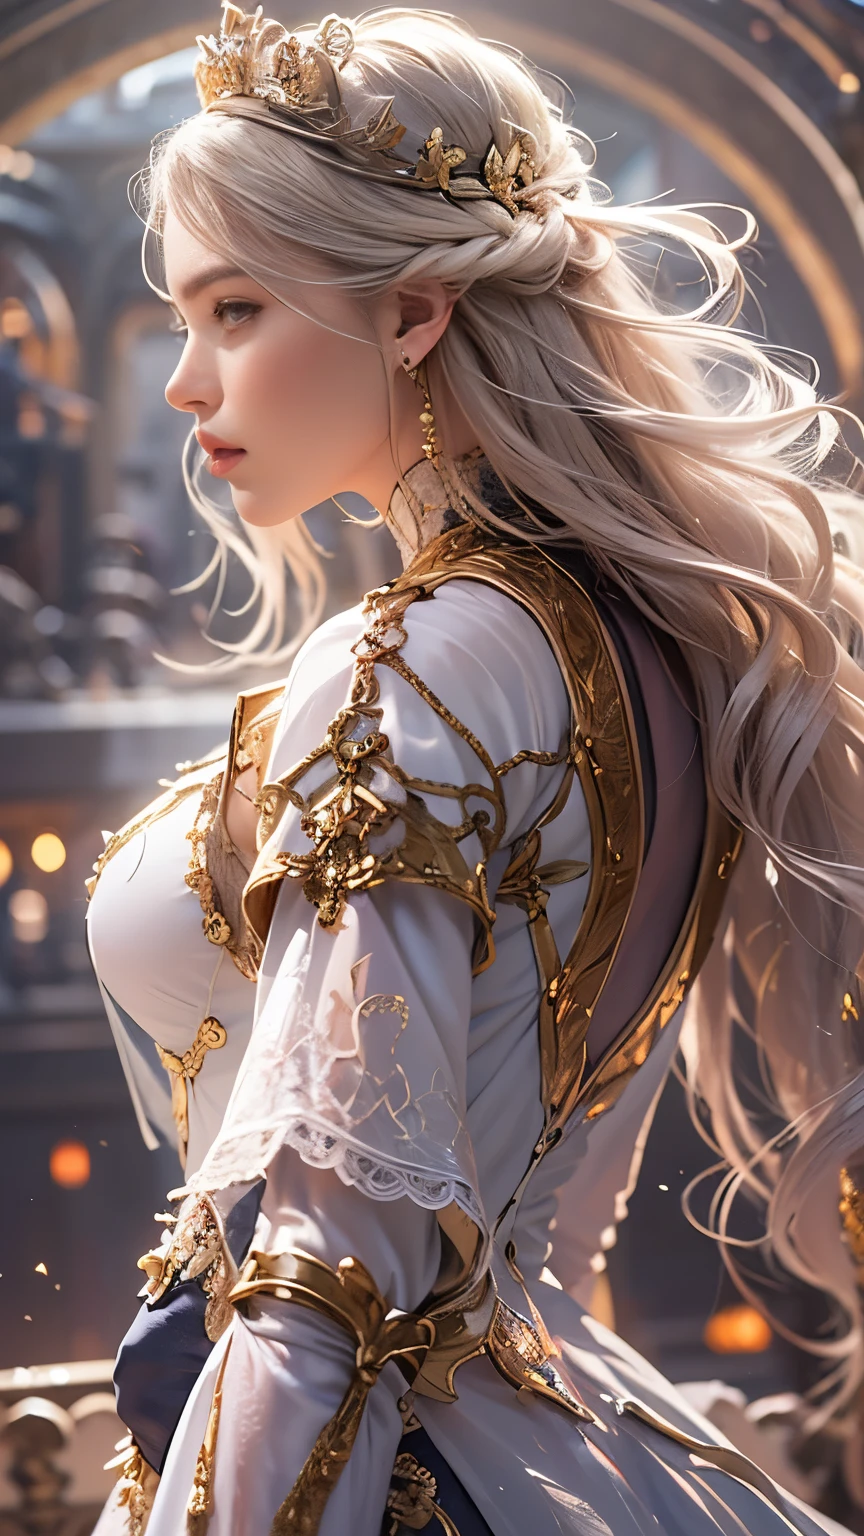 8K resolution, masterpiece, Highest quality, Award-winning works, unrealistic, sole sexy lady, healthy shaped body, 25 years old, white wavy long hair, hair band, big firm bouncing bust, ancient roman military commander's armor, Pure white armor with a complex structure, royal coat of arms, excalibur, elegant, Very detailed, Digital Painting, artステーション, コンセプトart, Smooth, Sharp focus, shape, artジャム、Greg Rutkowski、Alphonse Mucha、William Adolphe Bouguereau、art：Stephanie Law , Magnificent royal background, Royal Jewel, nature, Full Shot, Symmetric, Greg Rutkowski, Charlie Bowwater, beep, Unreal 5, Surreal, Dynamic Lighting, ファンタジーart, Complex colors, Colorful magic circle, flash,  dynamic sexy poses